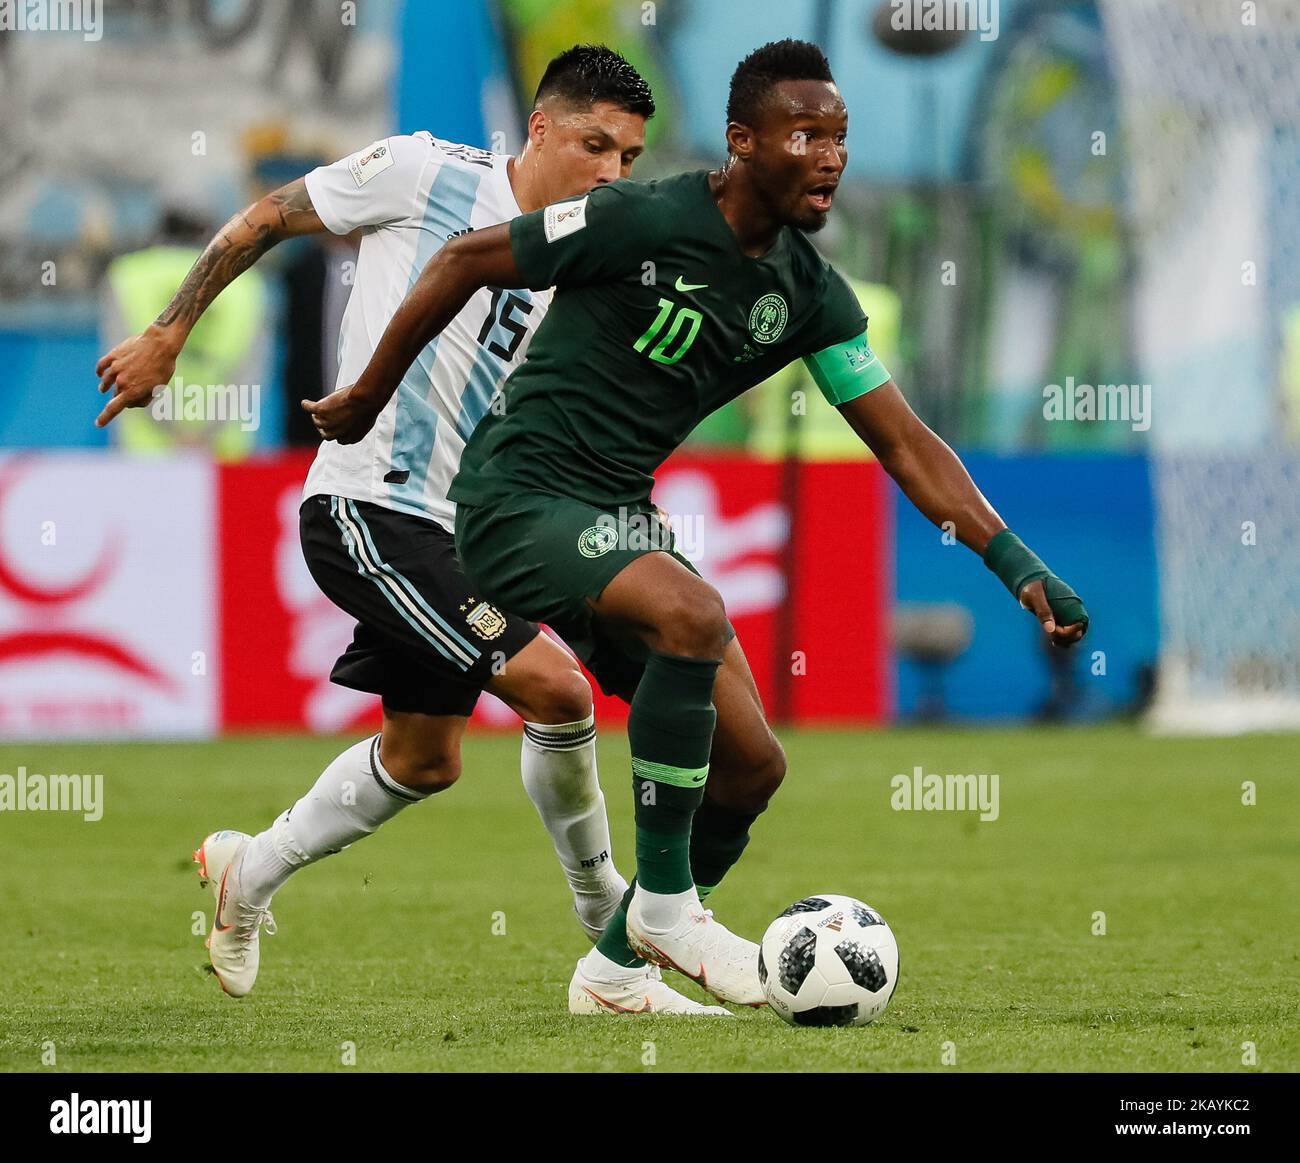 John Obi Mikel (R) of Nigeria national team and Enzo Perez of Argentina national team during the 2018 FIFA World Cup Russia group D match between Nigeria and Argentina on June 26, 2018 at Saint Petersburg Stadium in Saint Petersburg, Russia. (Photo by Mike Kireev/NurPhoto) Stock Photo